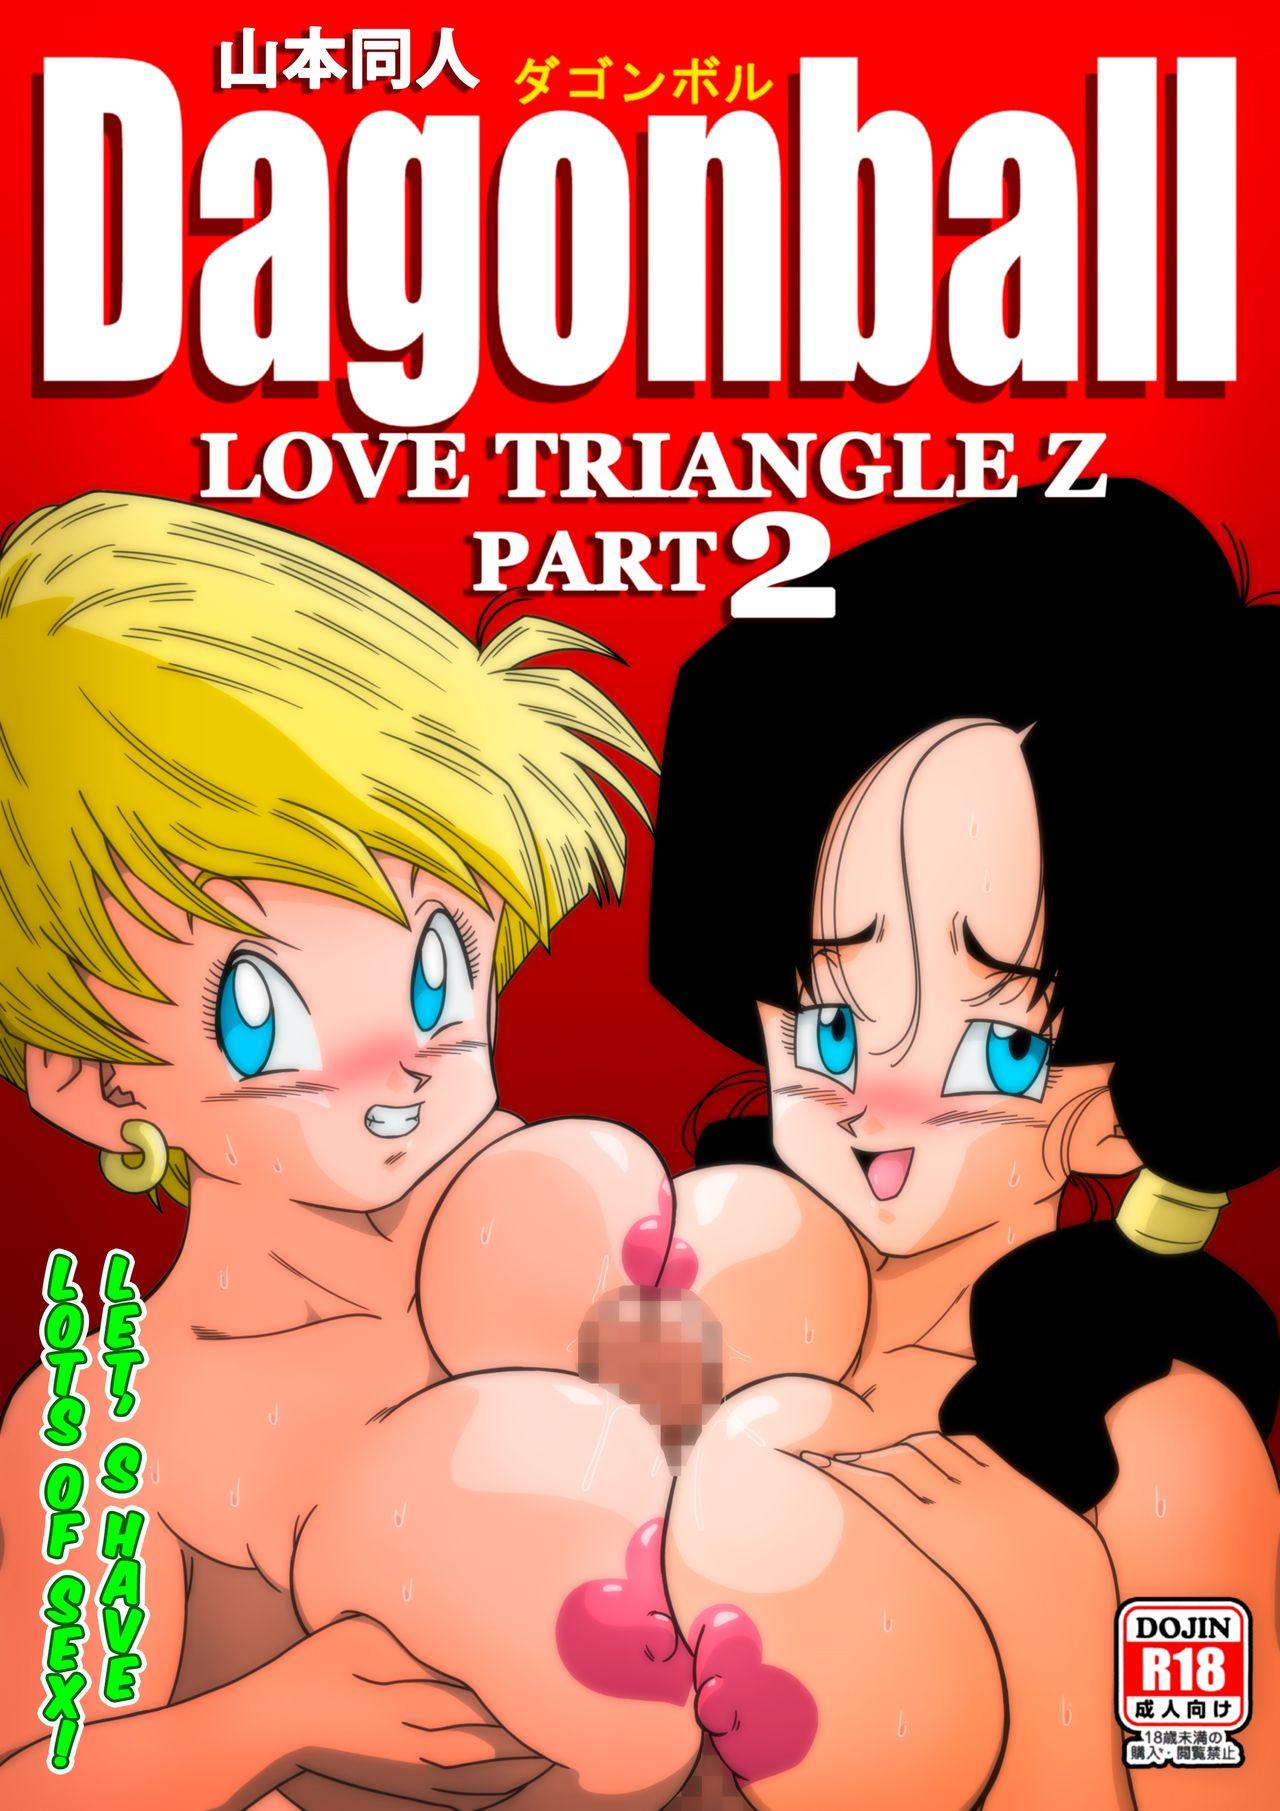 Moaning LOVE TRIANGLE Z Part 2 - Dragon ball z For - Picture 1